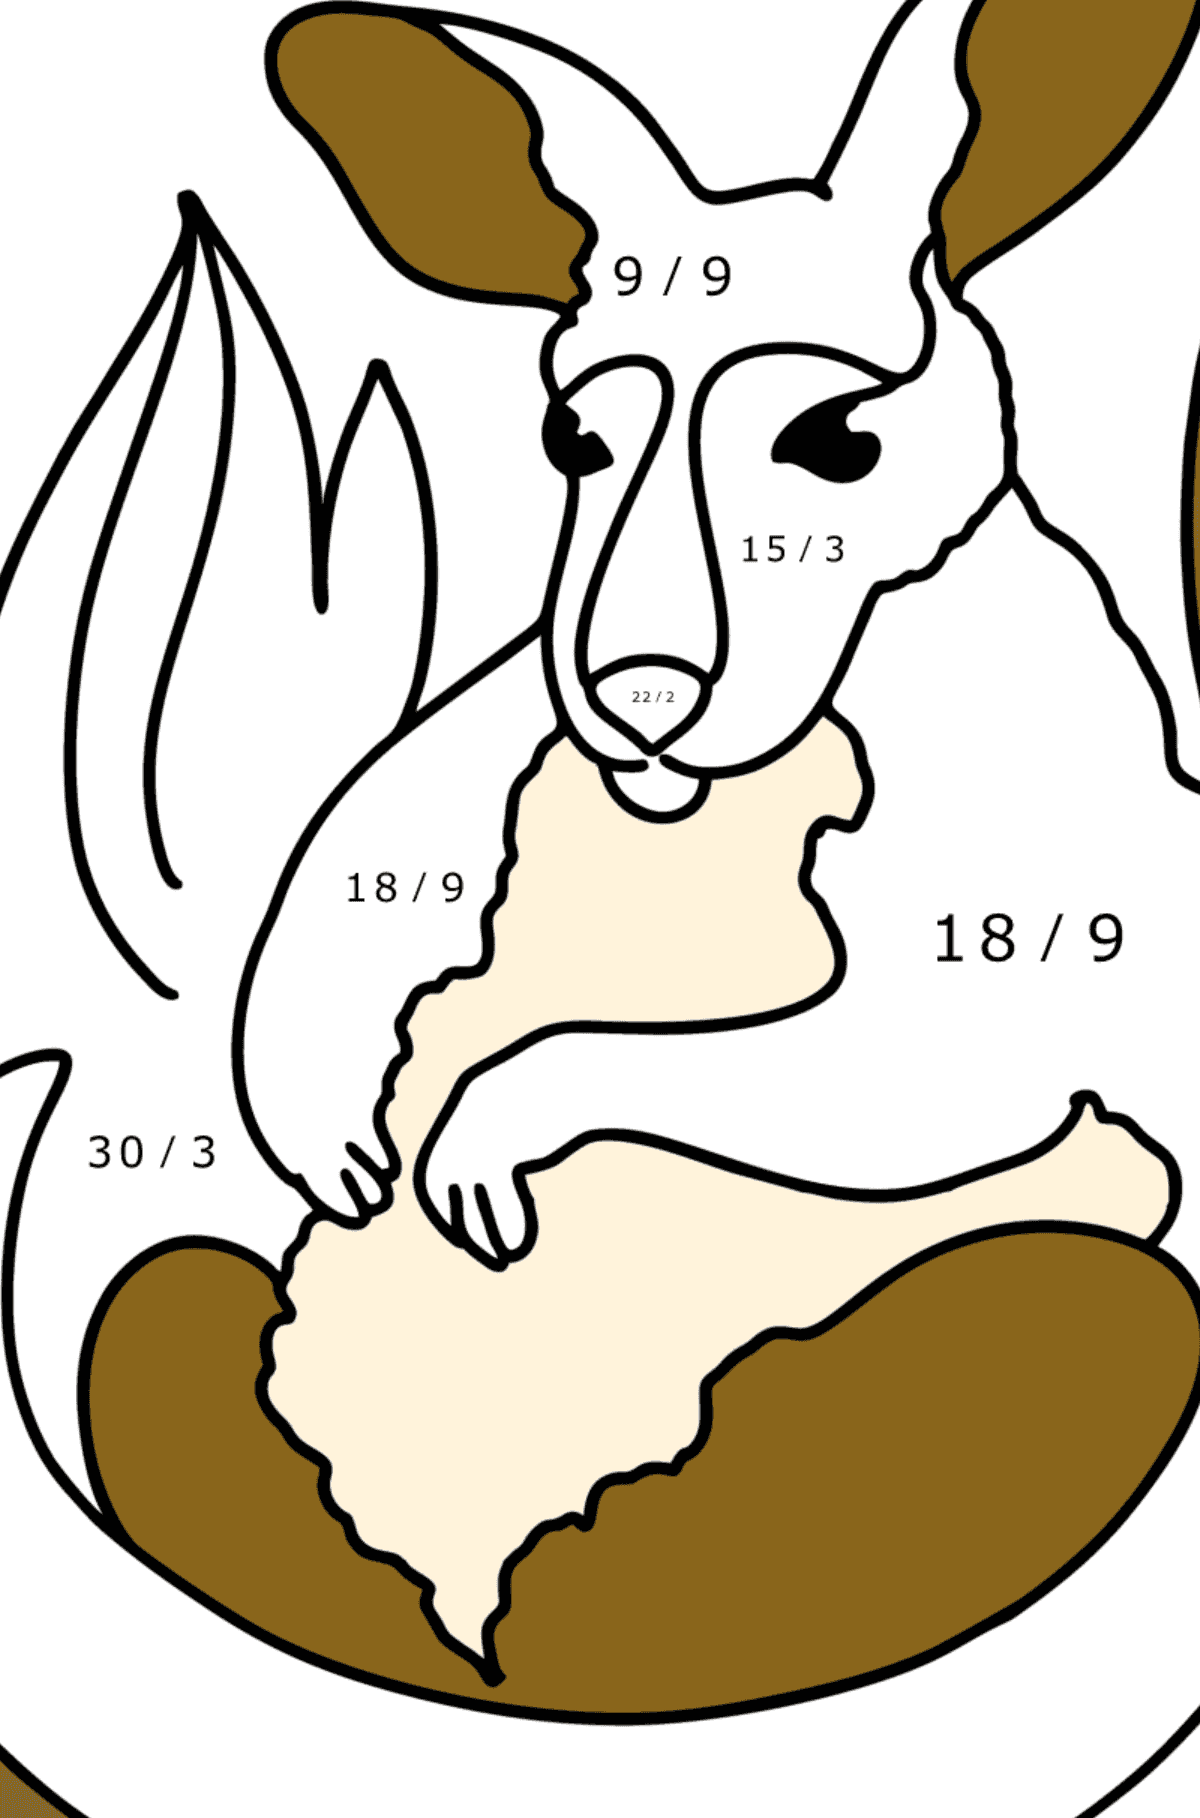 Coloring page - Adorable baby kangaroo - Math Coloring - Division for Kids